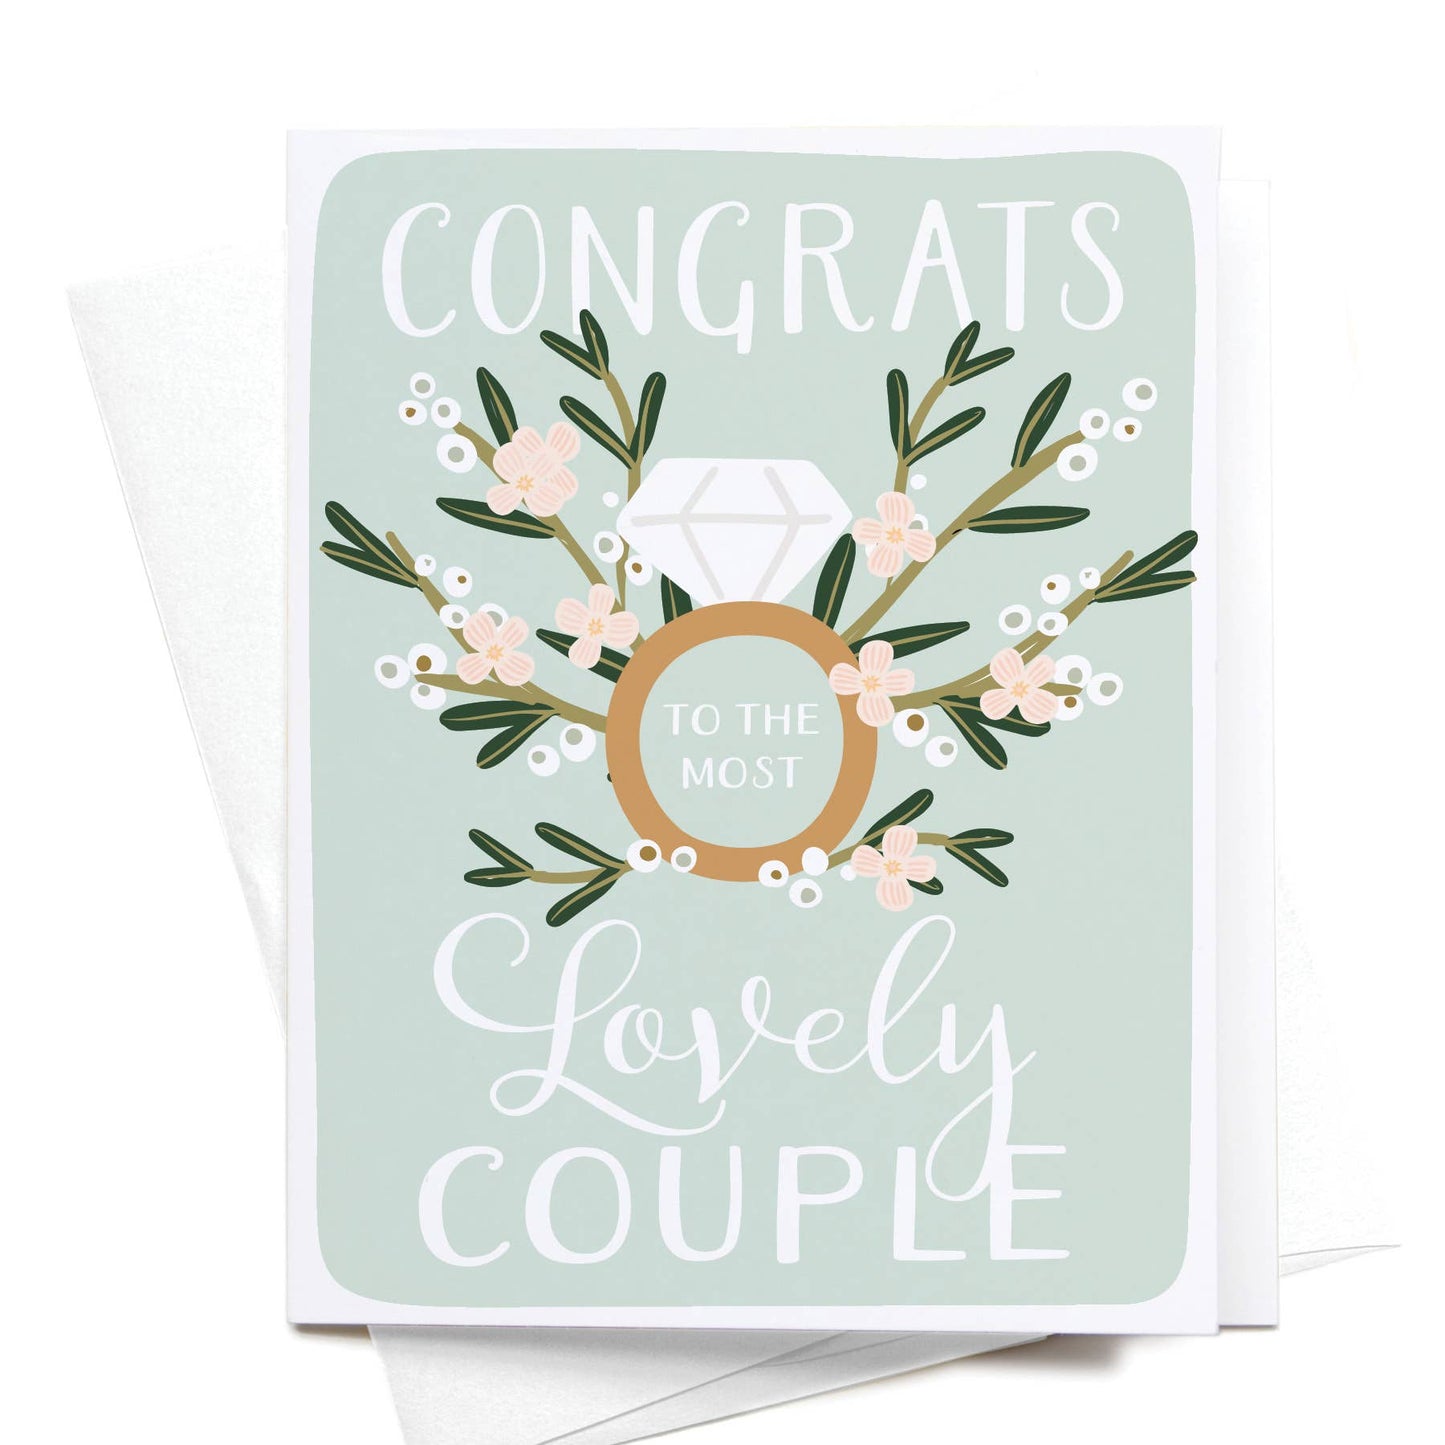 "Congrats to the Most Lovely Couple" Greeting Card